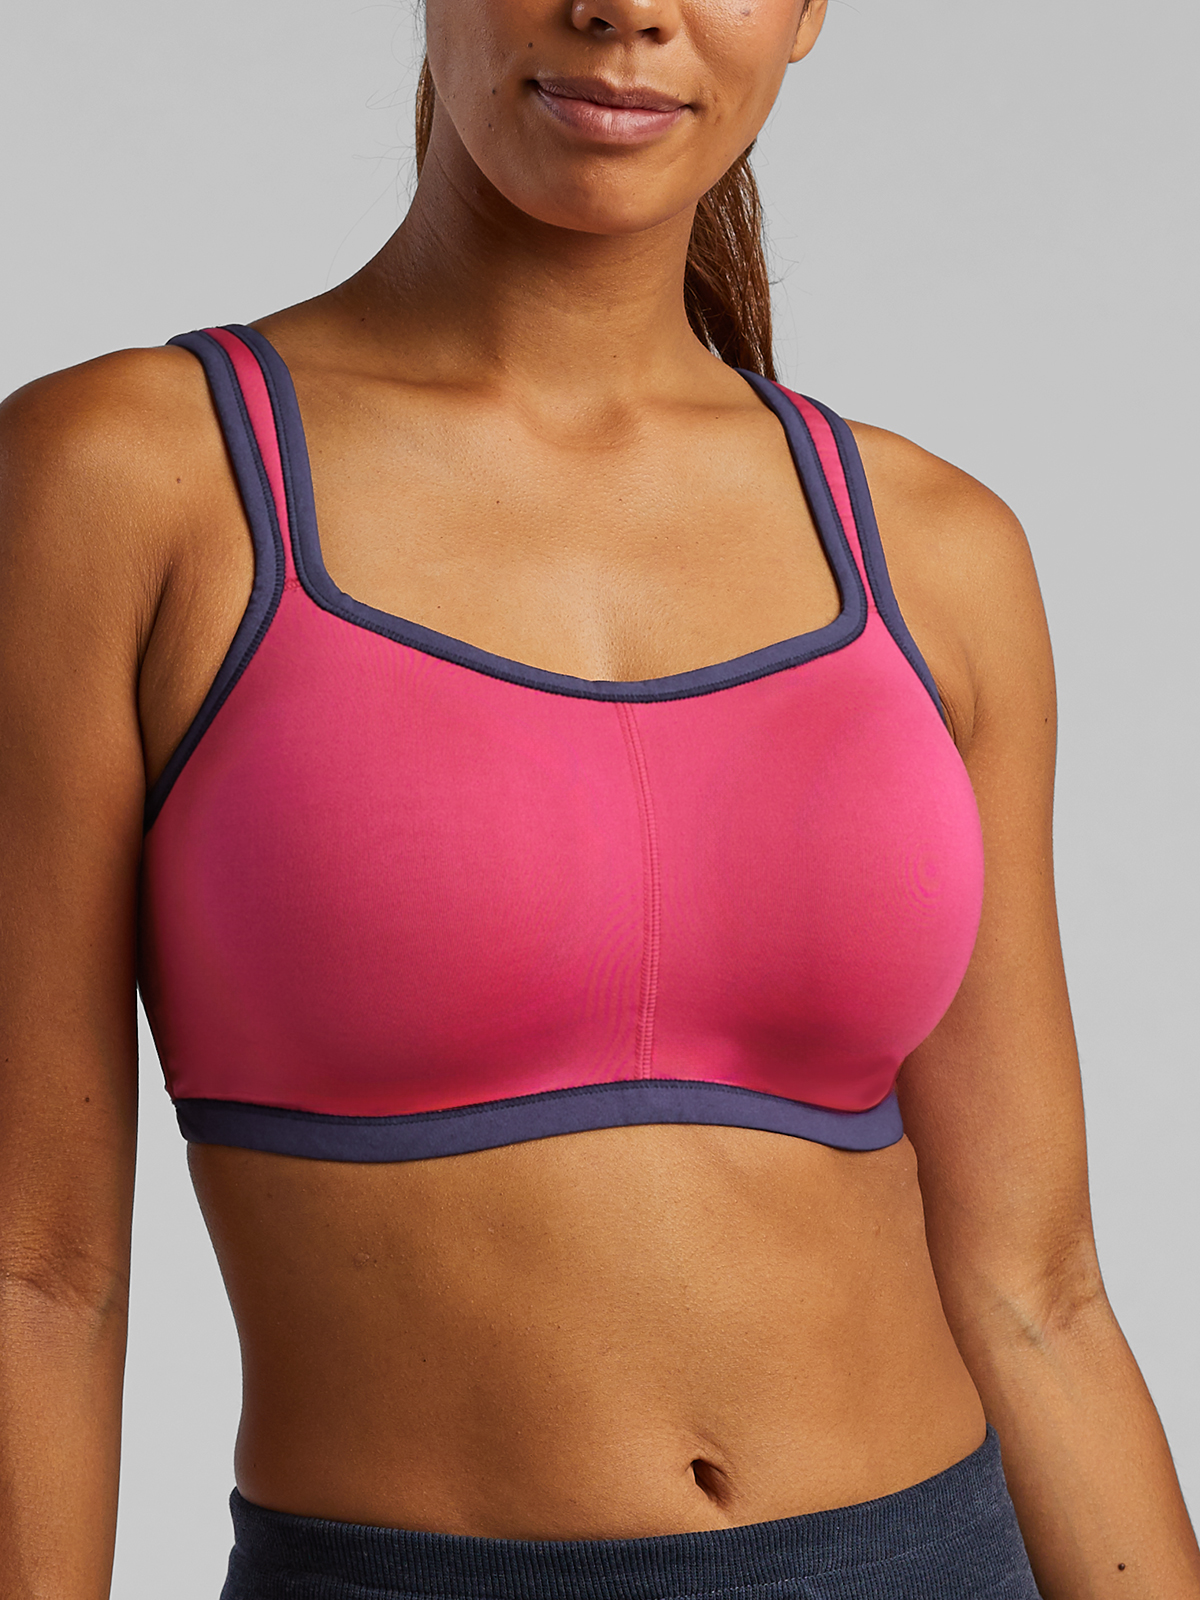 A right bra for suitable occasions plays important role in the success too  201-1014, Energized sports bra #sorellaoutletmy#bra#suitable#